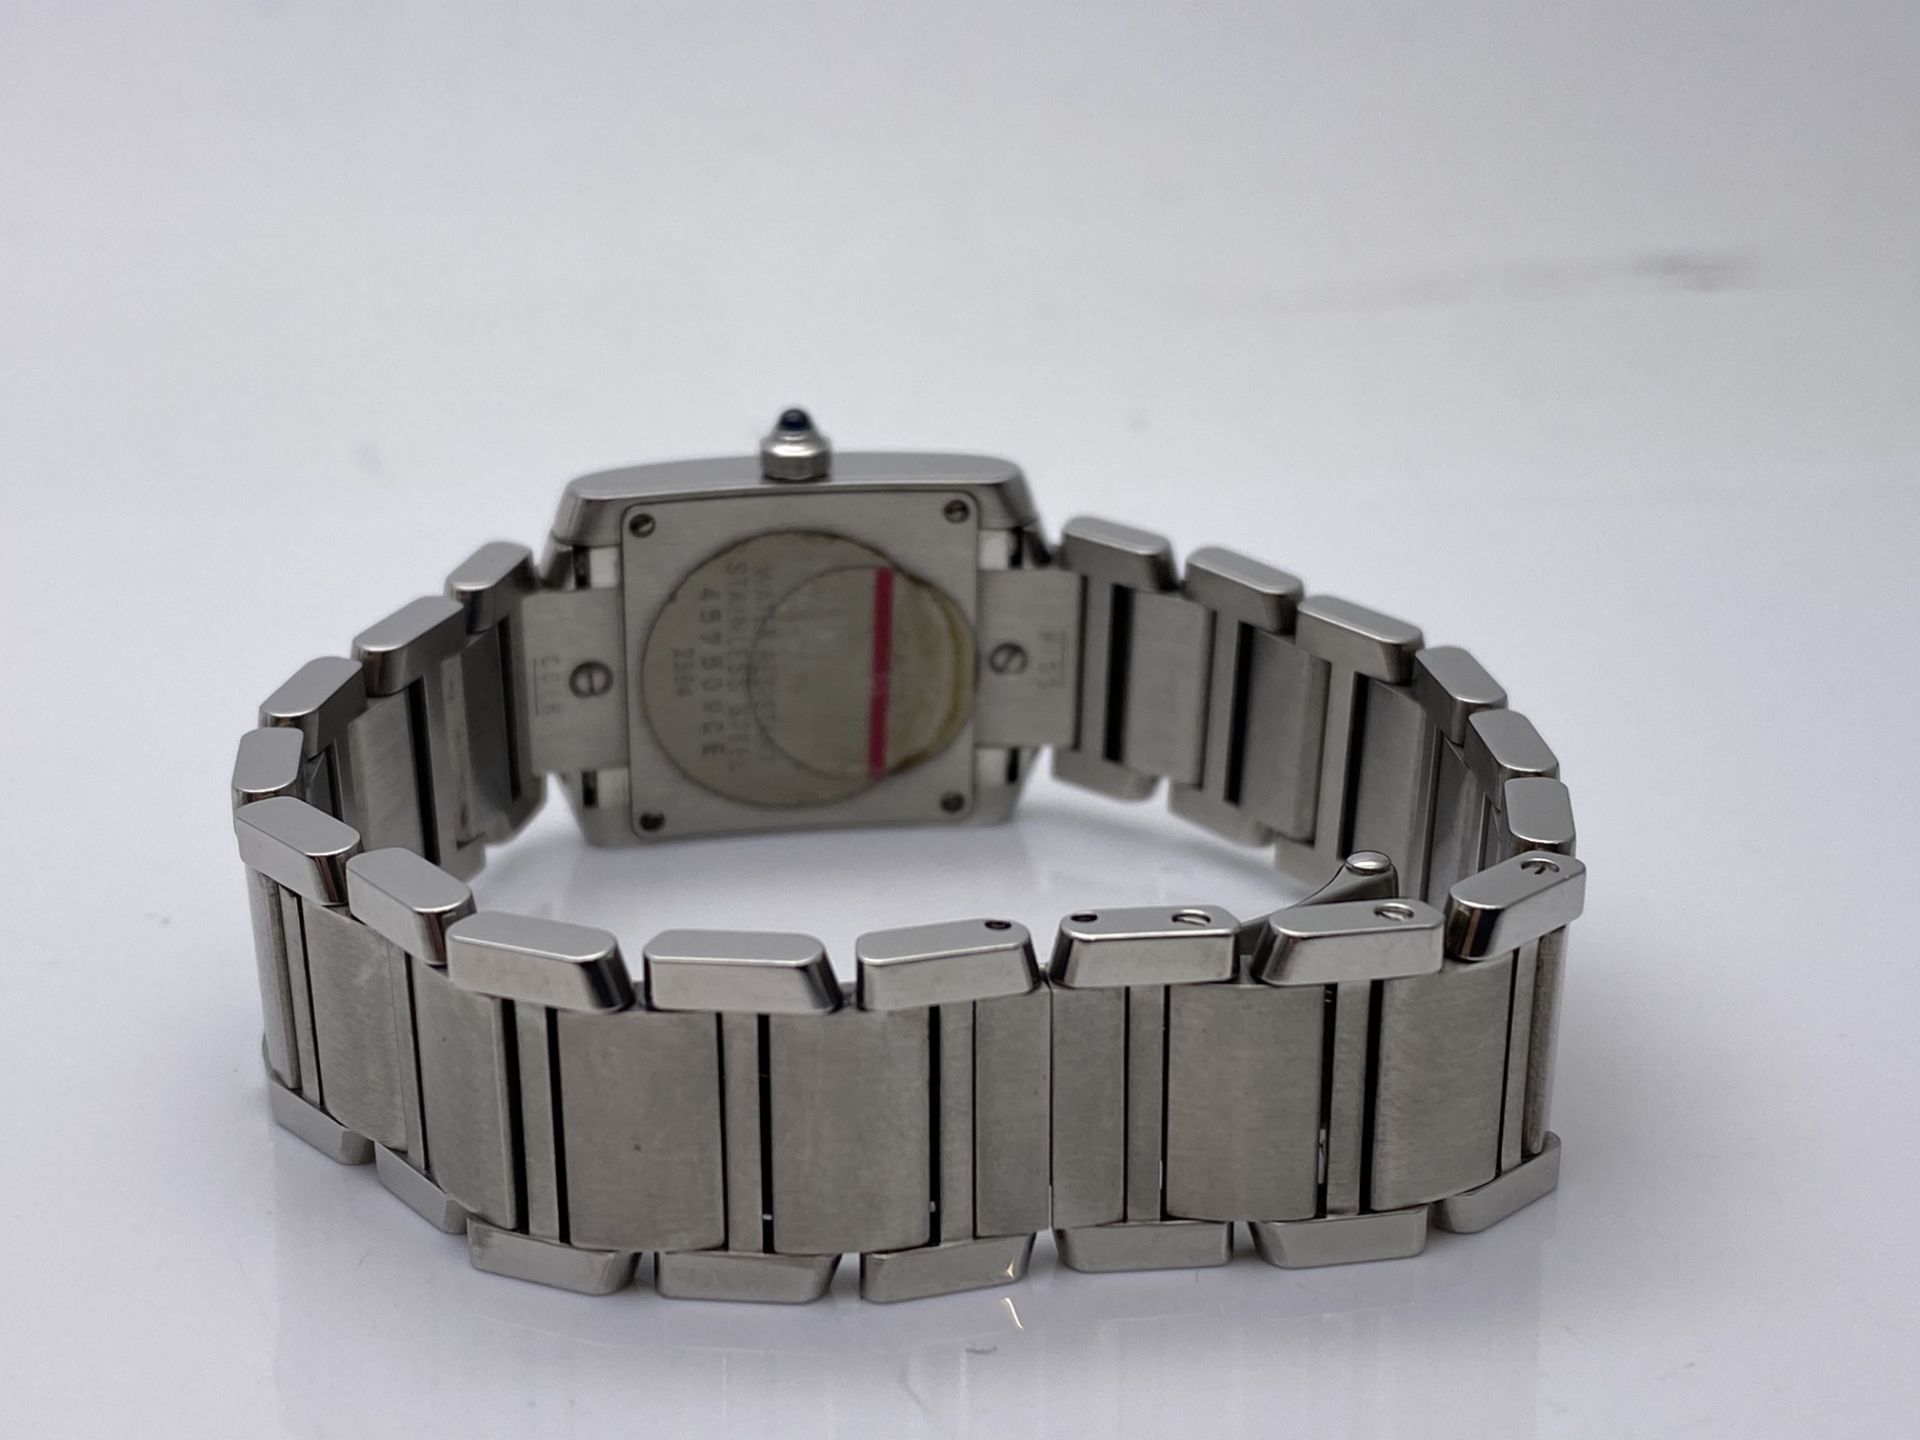 LADIES CARTIER TANK FRANCAISE WATCH, STAINLESS STEEL, WATCH ONLY (352) - Image 4 of 4